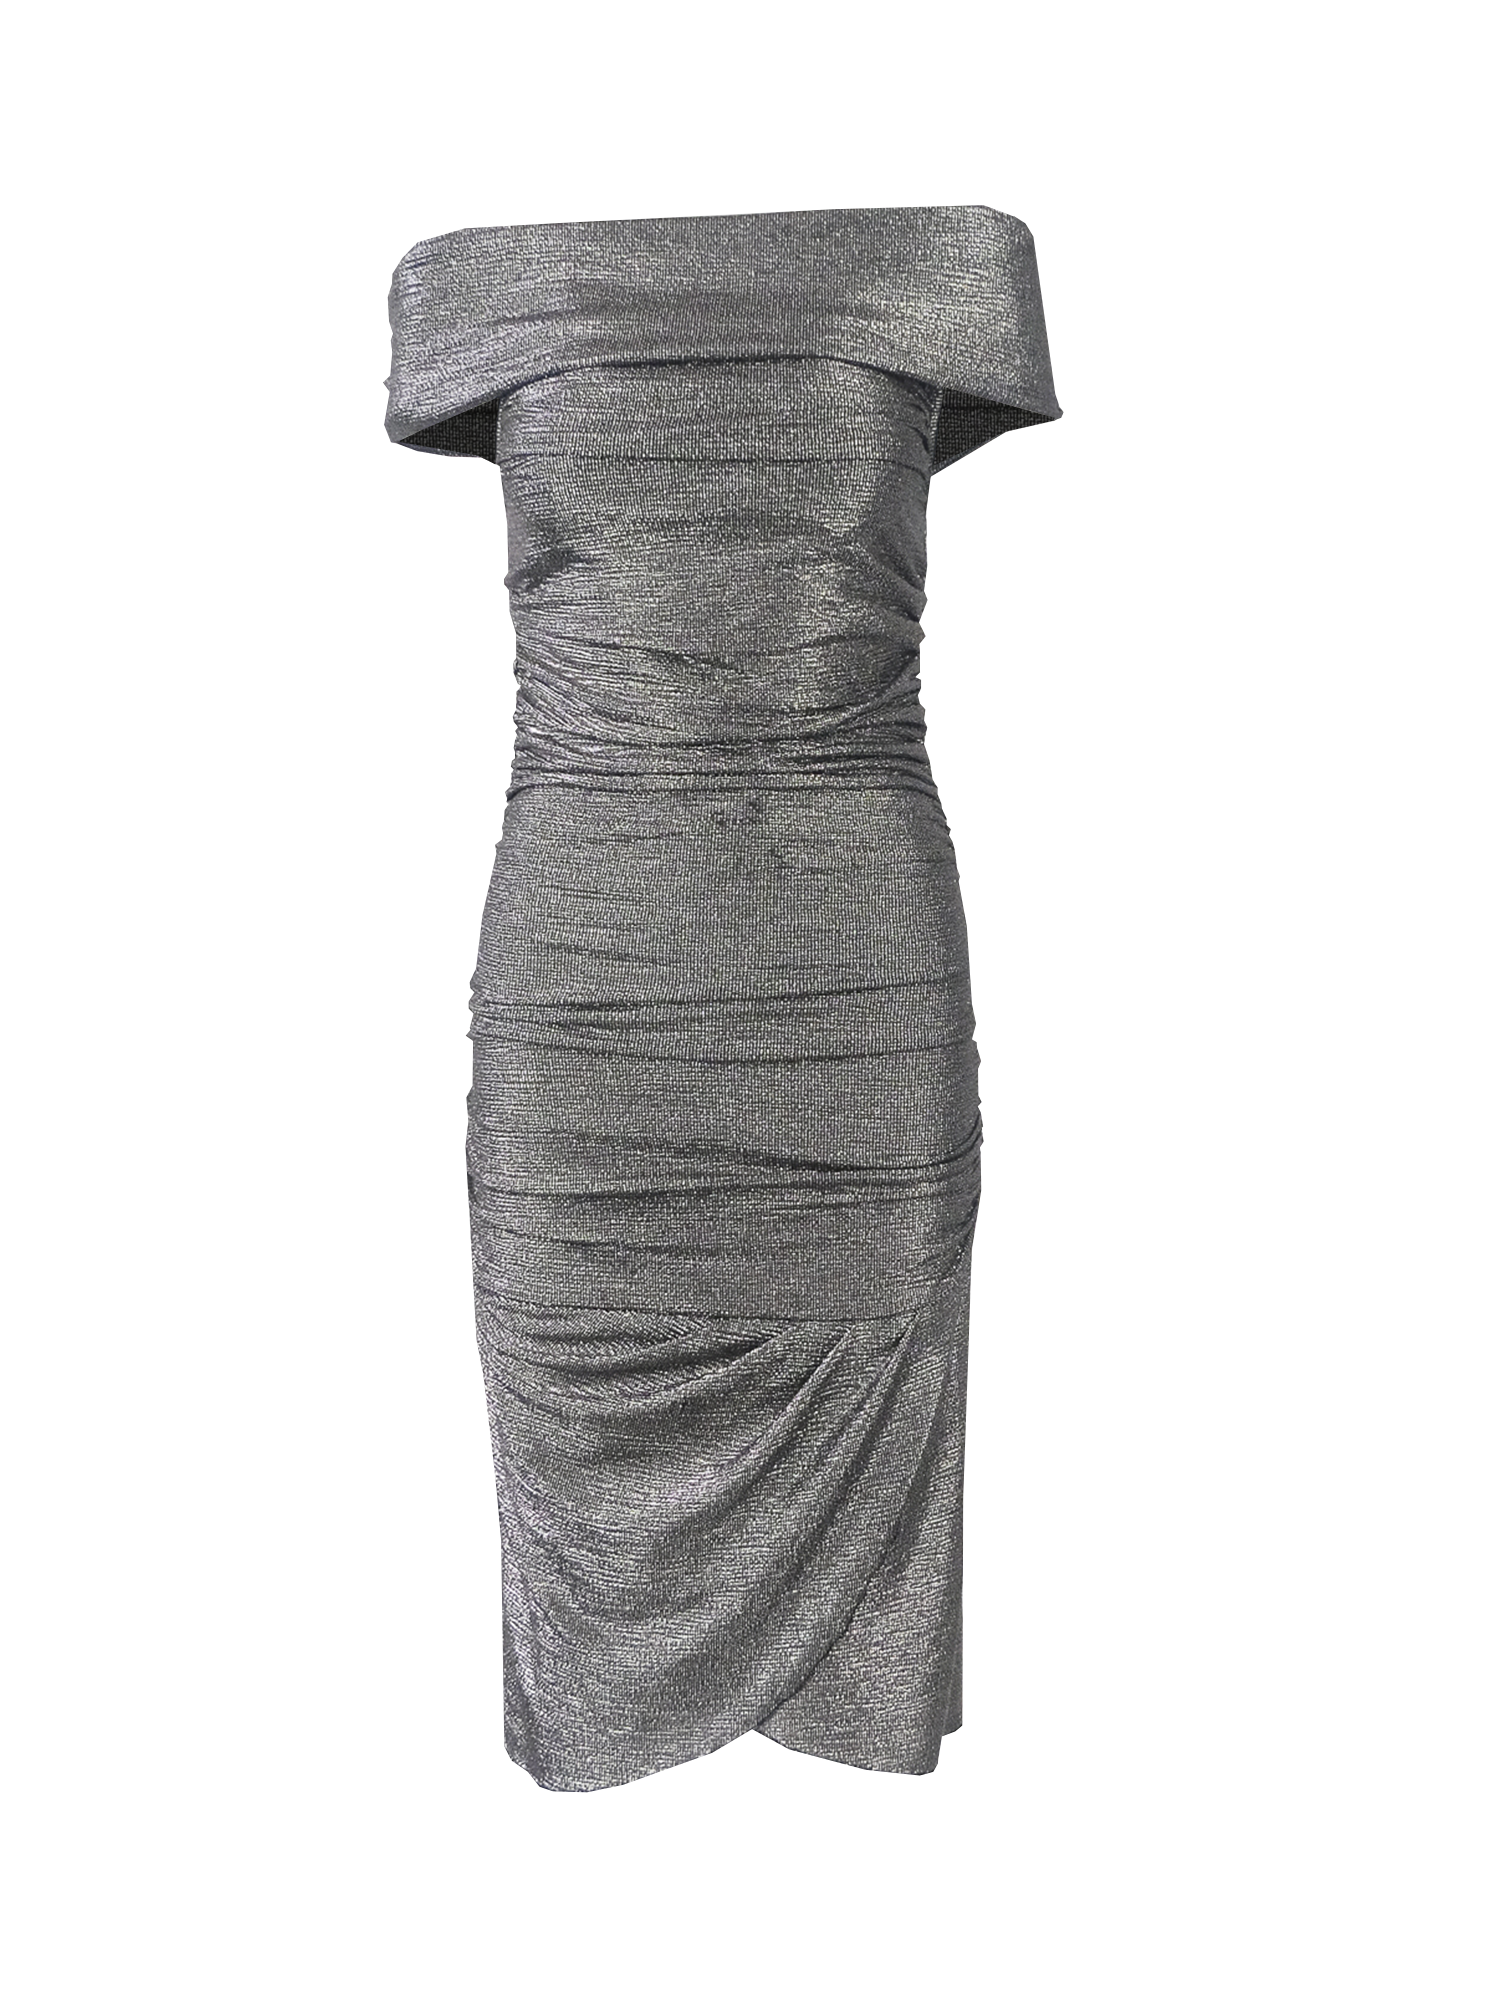 VIOLANTE - dress with bare shoulders in charcoal grey